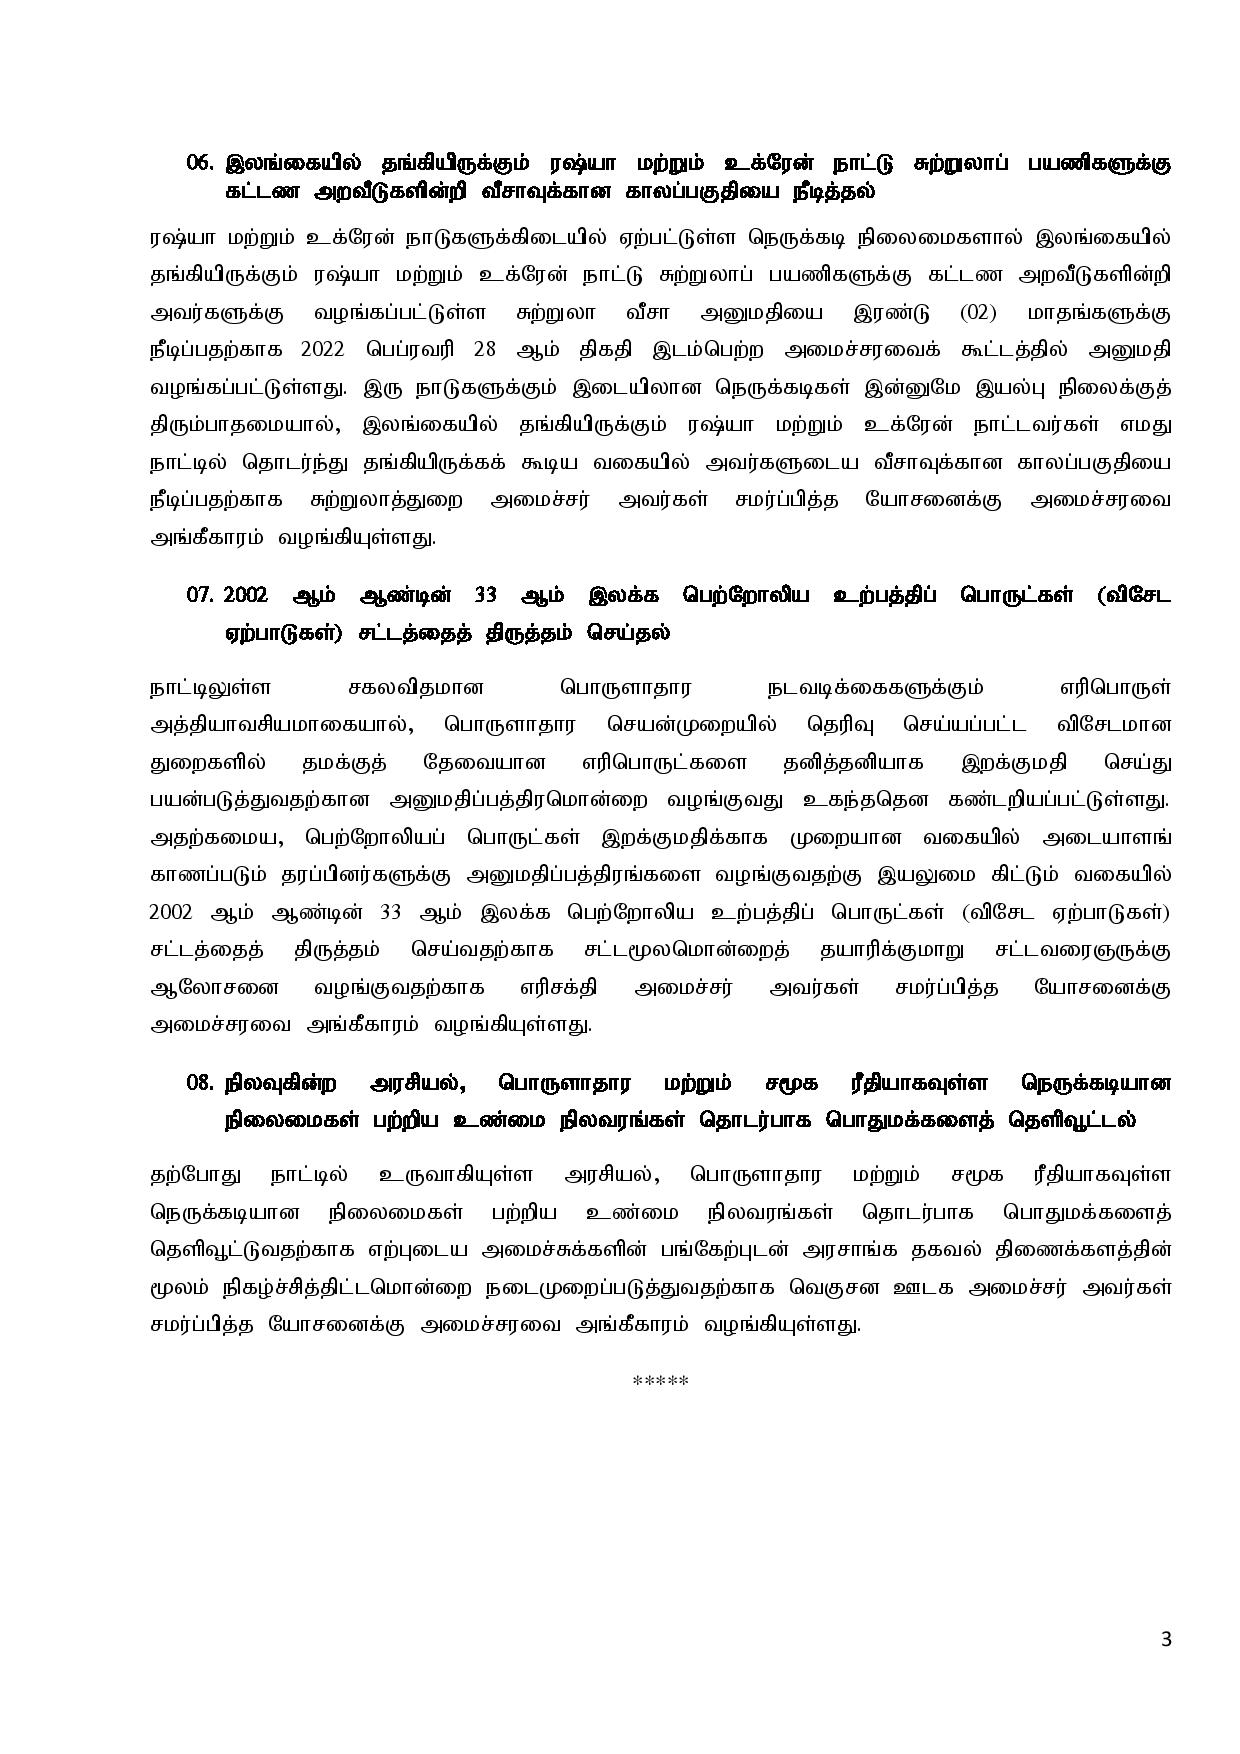 Cabinet Decisions on 25.04.2022 Tamil page 003